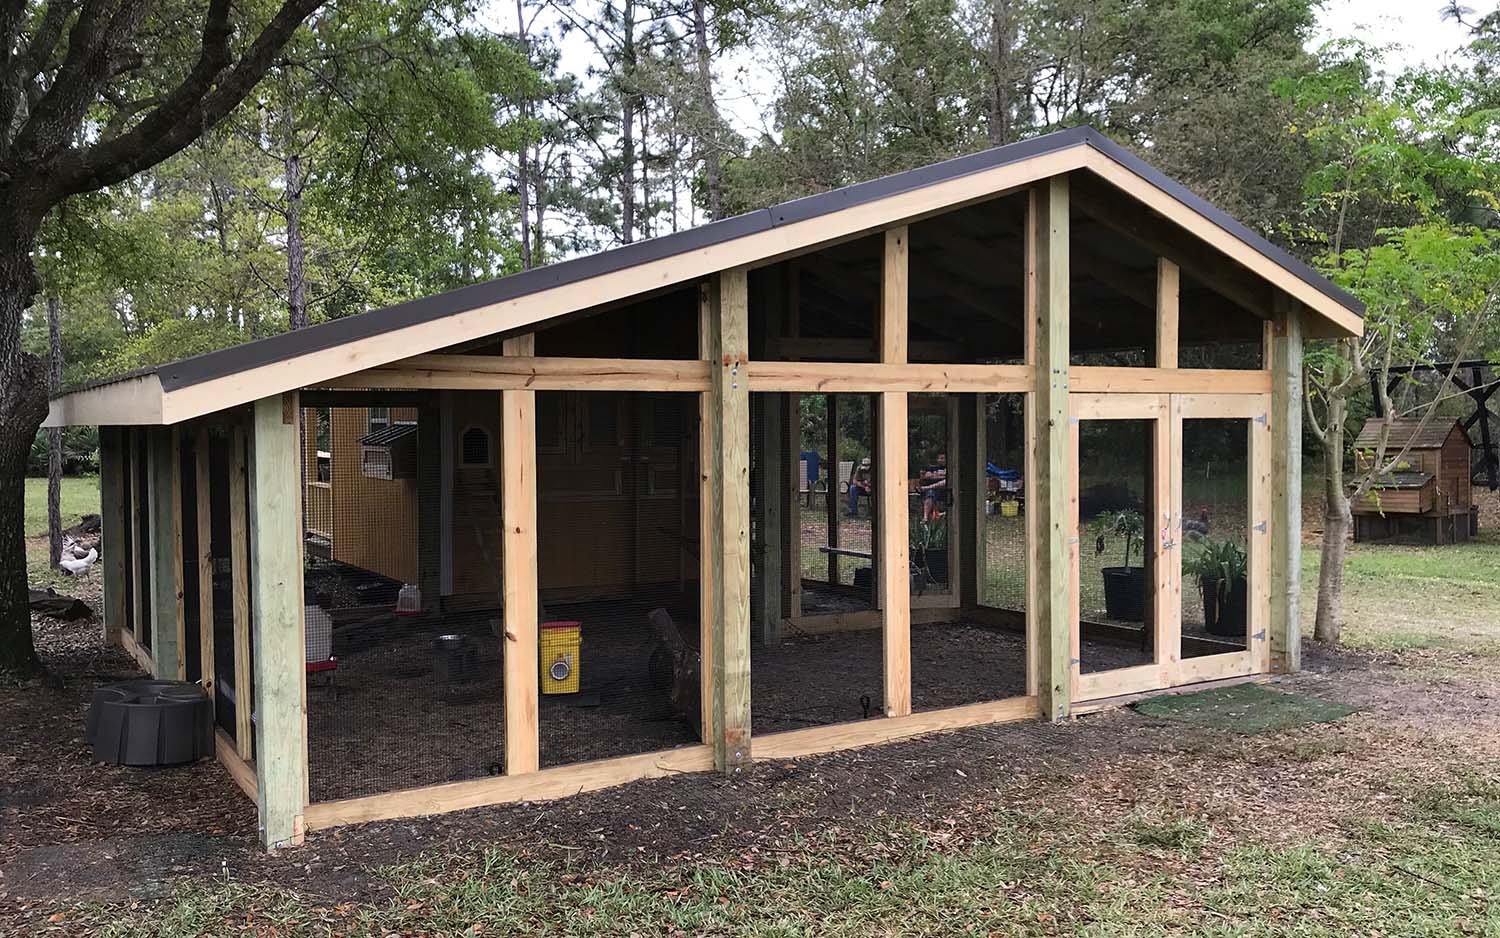 Large custom chicken run built onto converted shed in Orlando, Florida